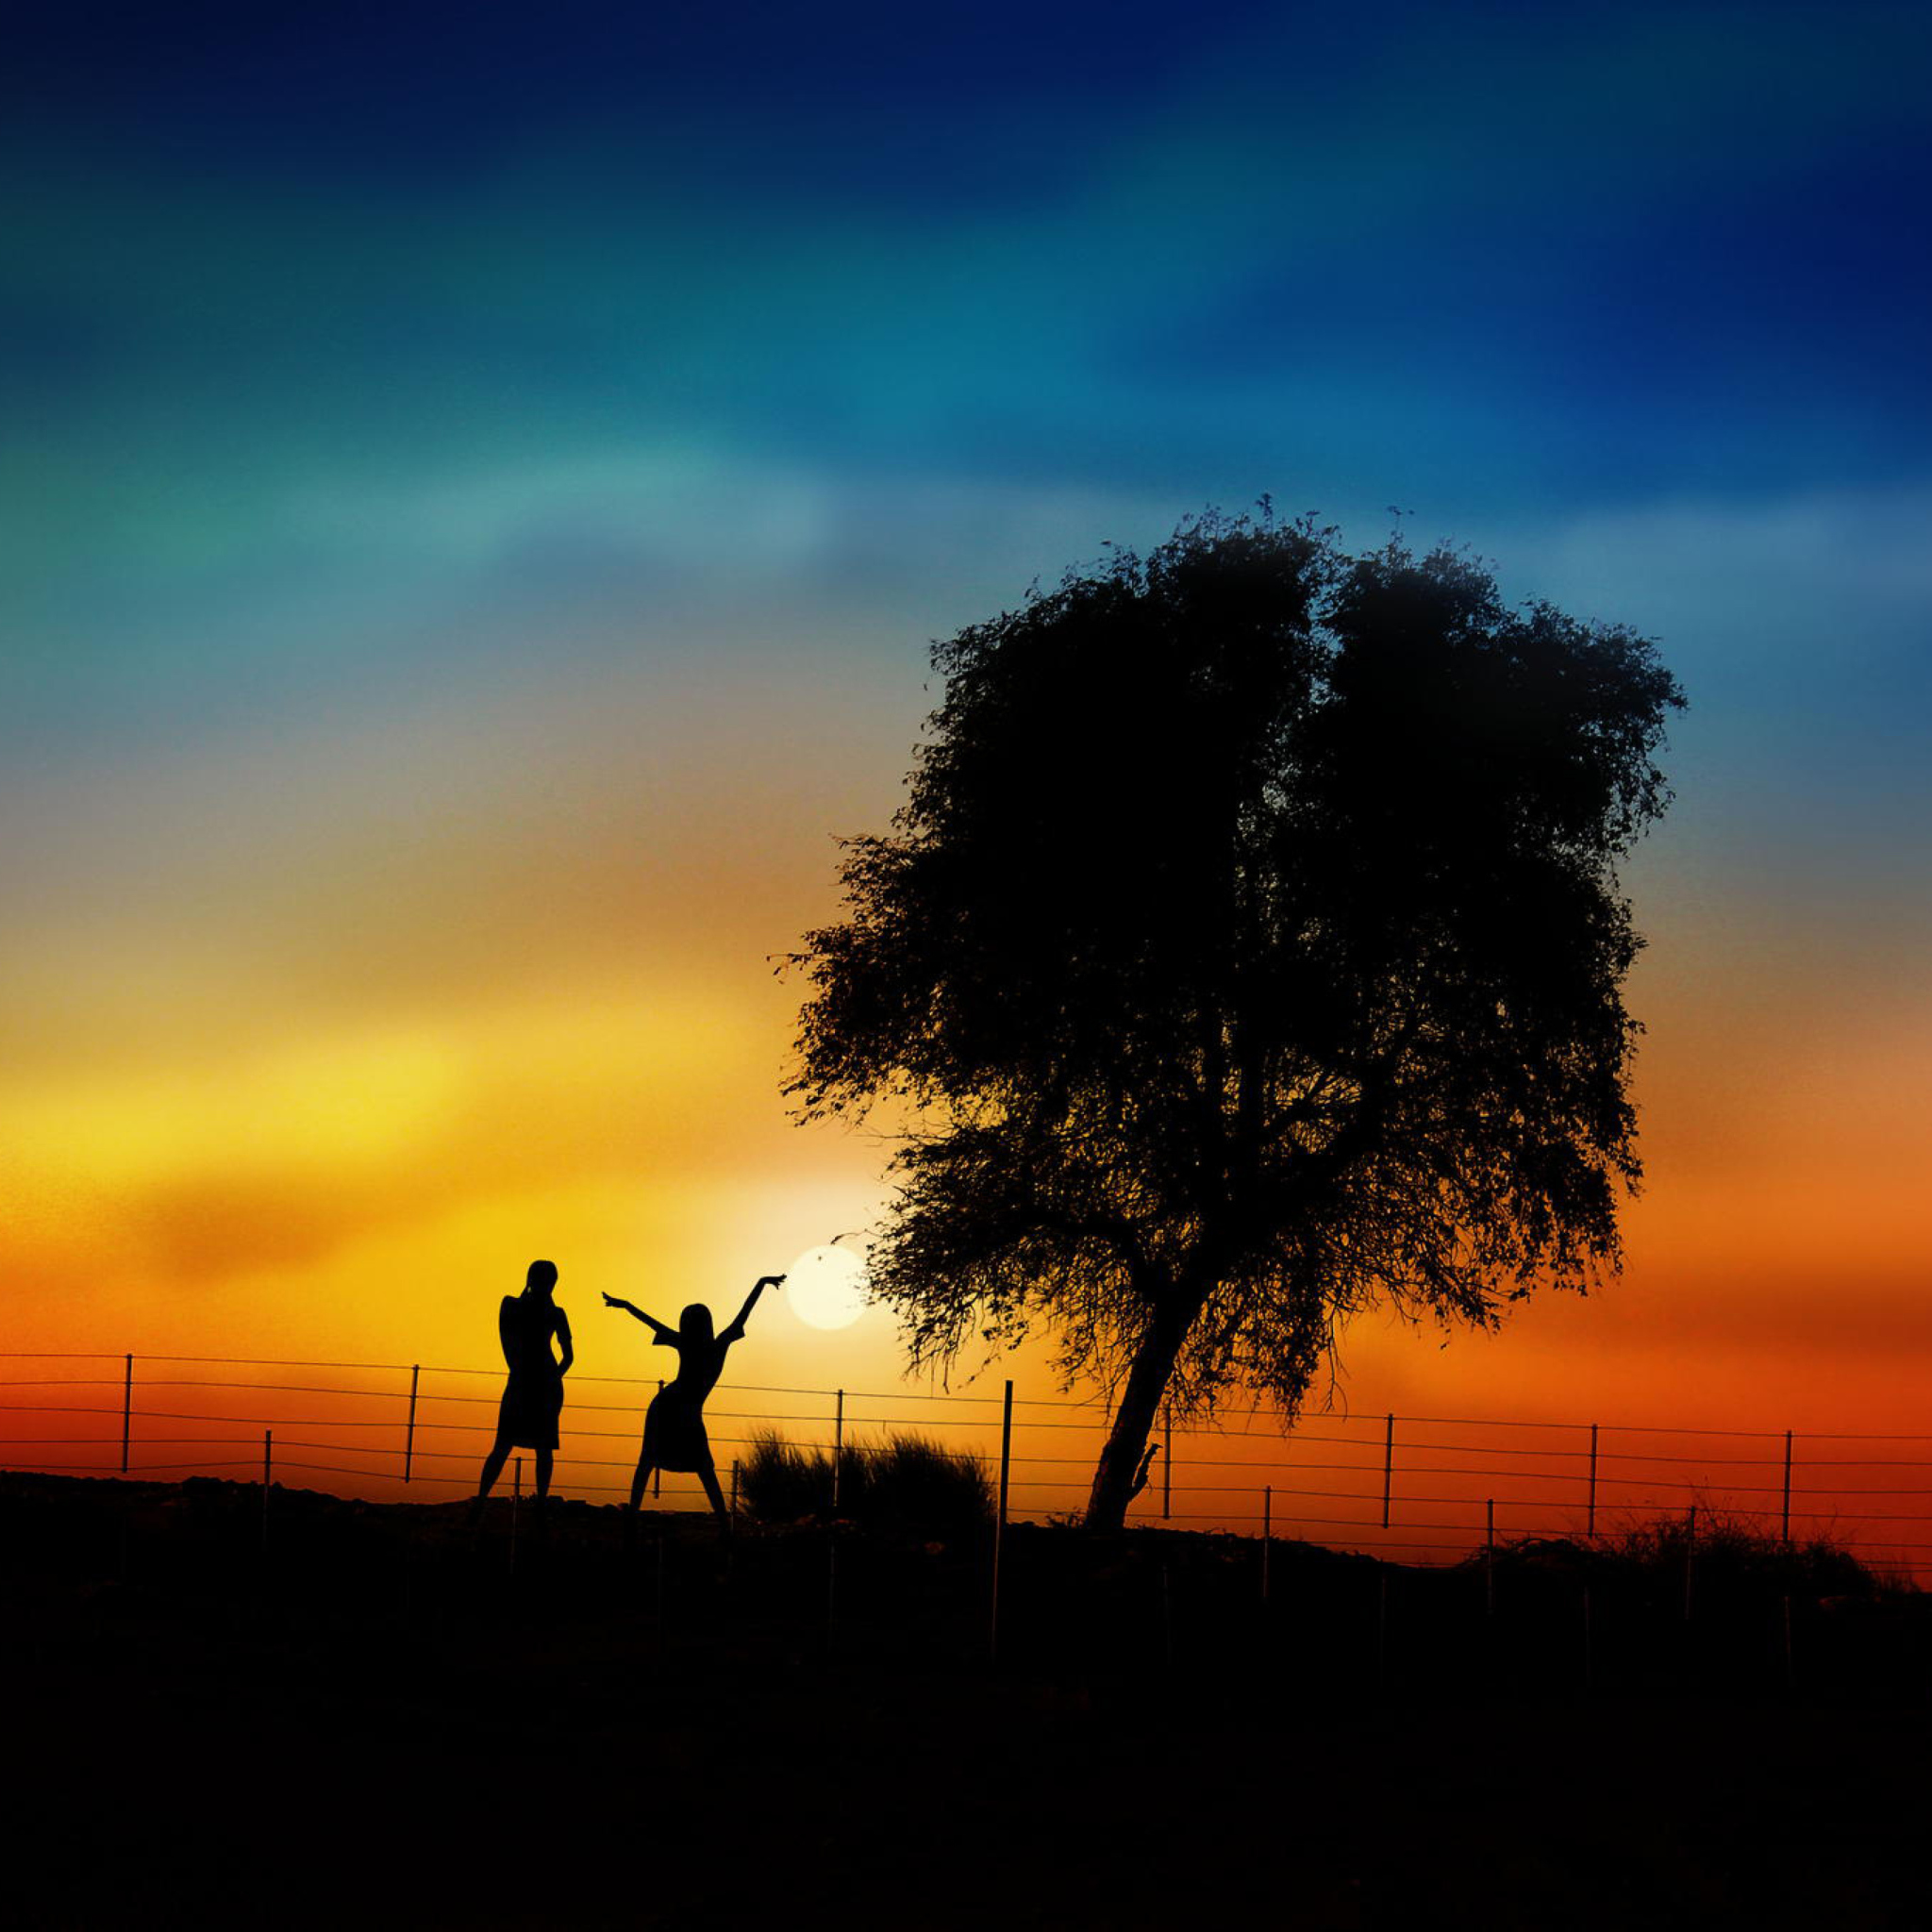 Das Couple Silhouettes Under Tree At Sunset Wallpaper 2048x2048